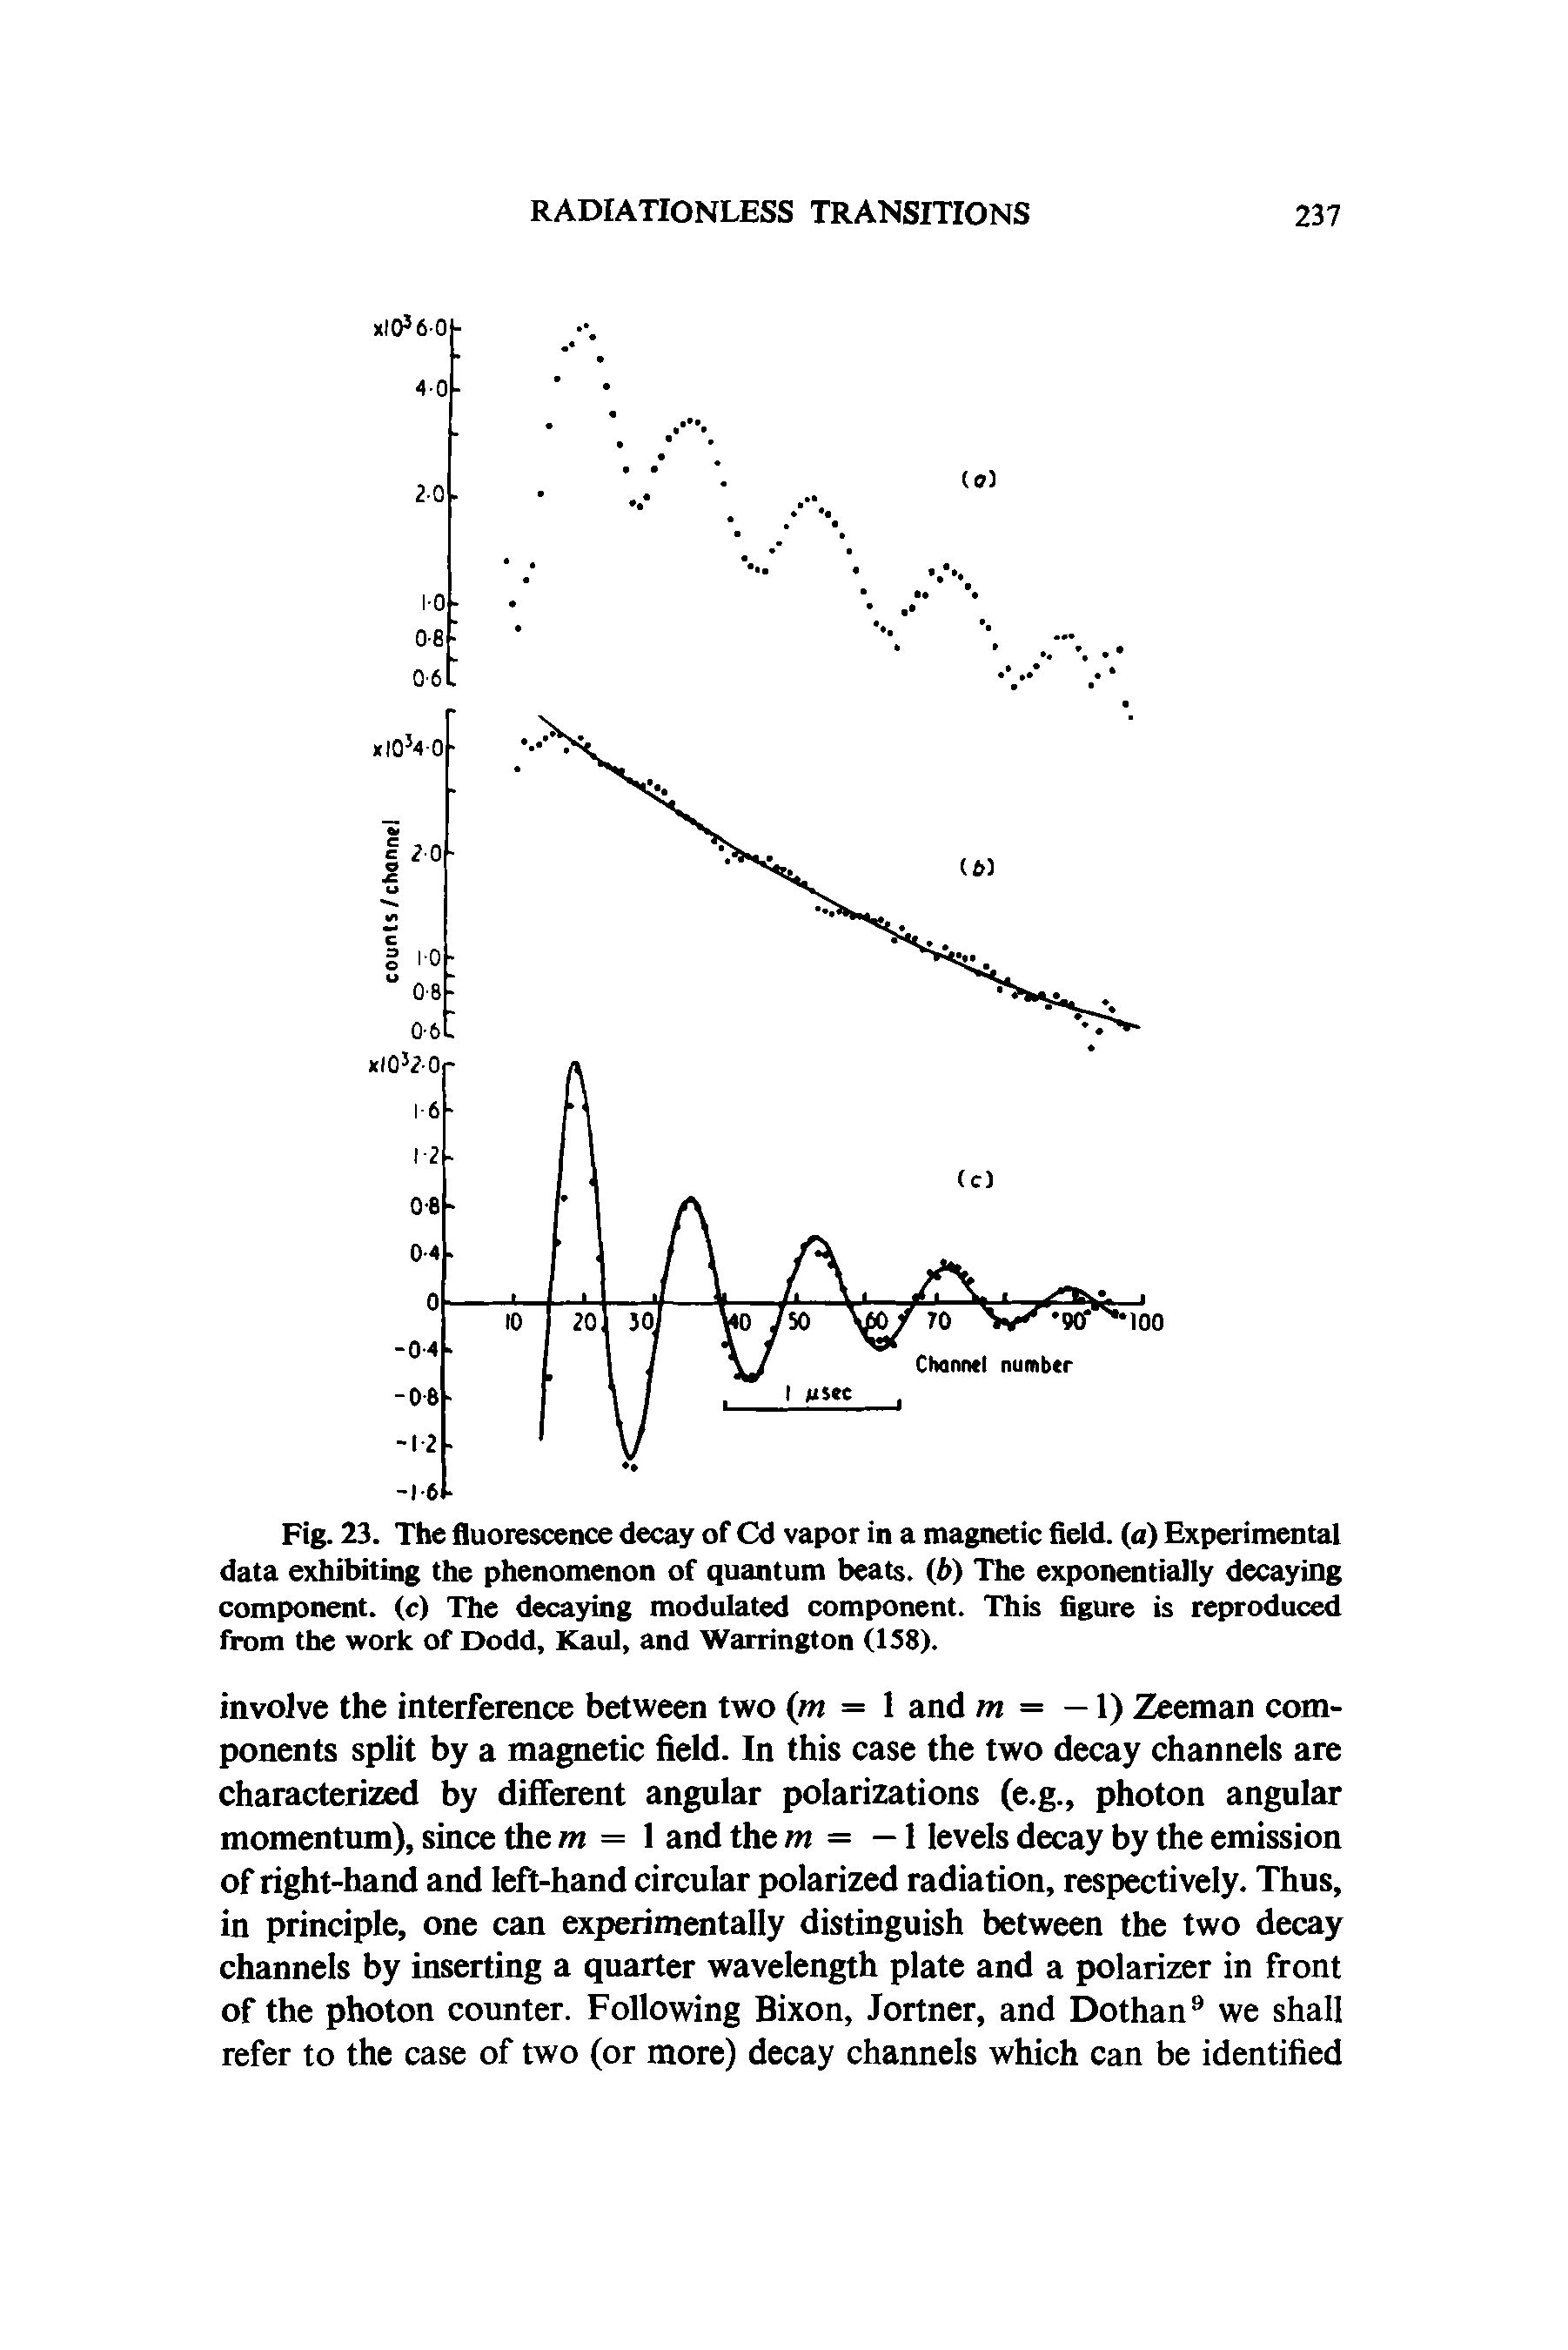 Fig. 23. The fluorescence decay of Cd vapor in a magnetic field, (a) Experimental data exhibiting the phenomenon of quantum beats, (b) The exponentially decaying component, (c) The decaying modulated component. This figure is reproduced from the work of Dodd, Kaul, and Warrington (158).